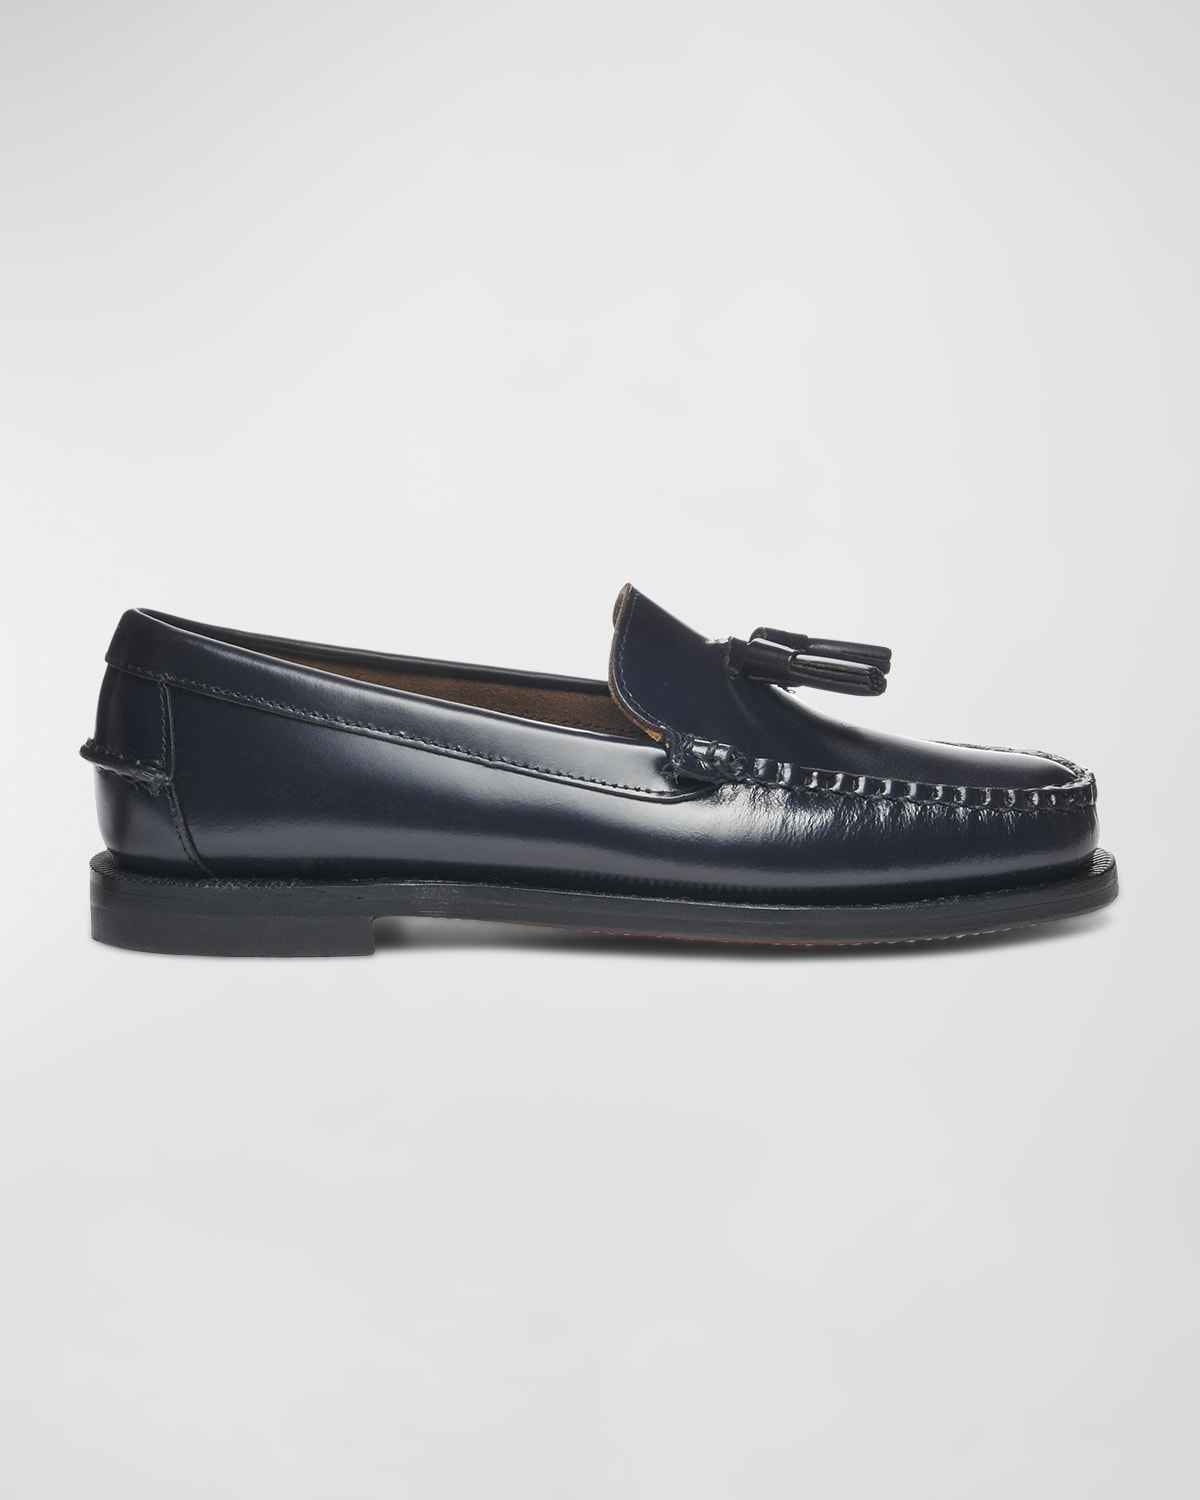 Classic Will Tassel Penny Loafers